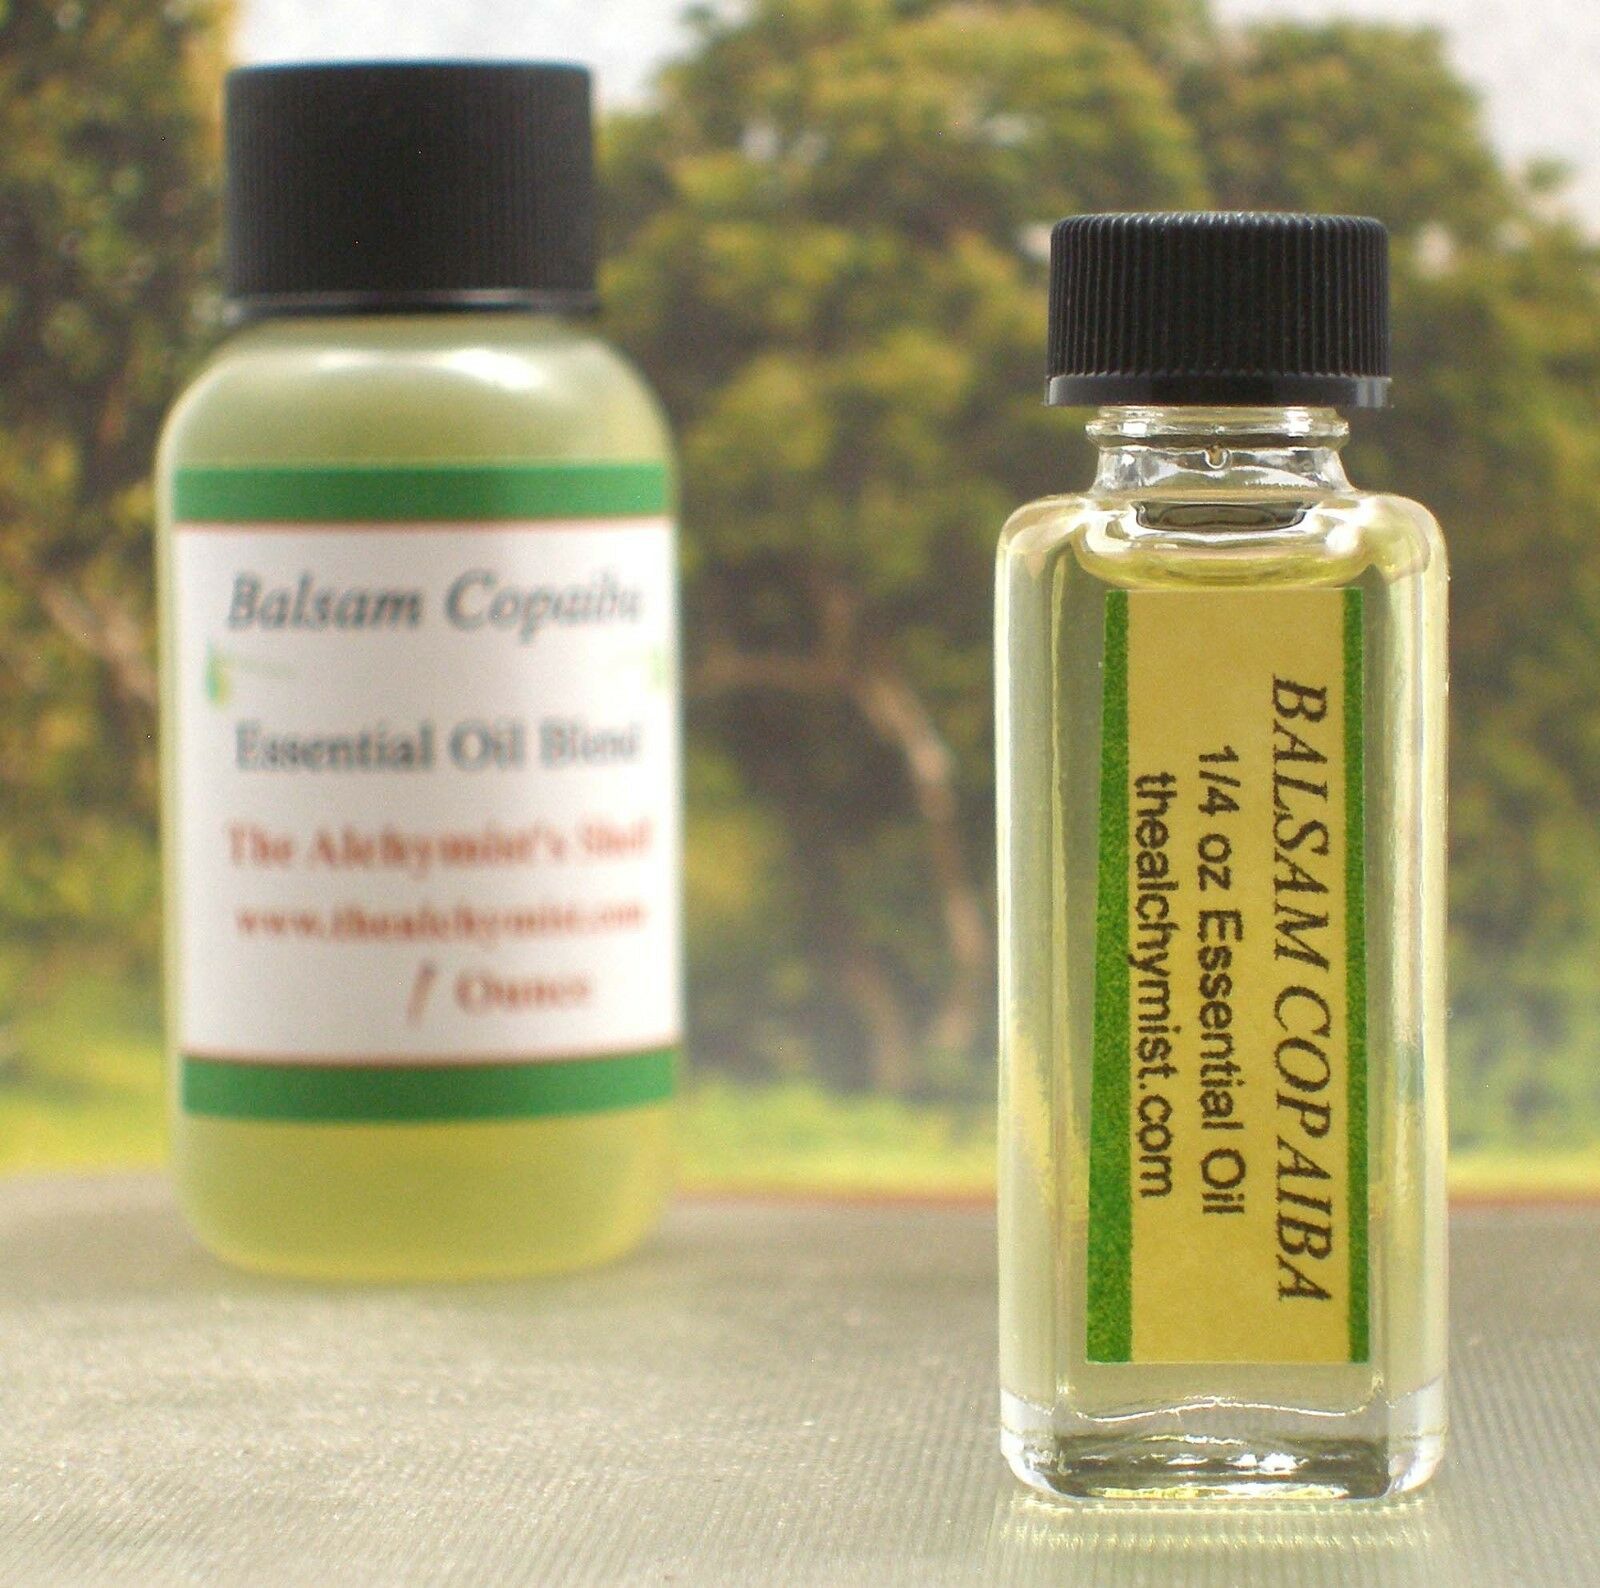 Balsam Copaiba Essential Oil 1/4 Oz Wiccan Craft Pagan Ritual Spell Special